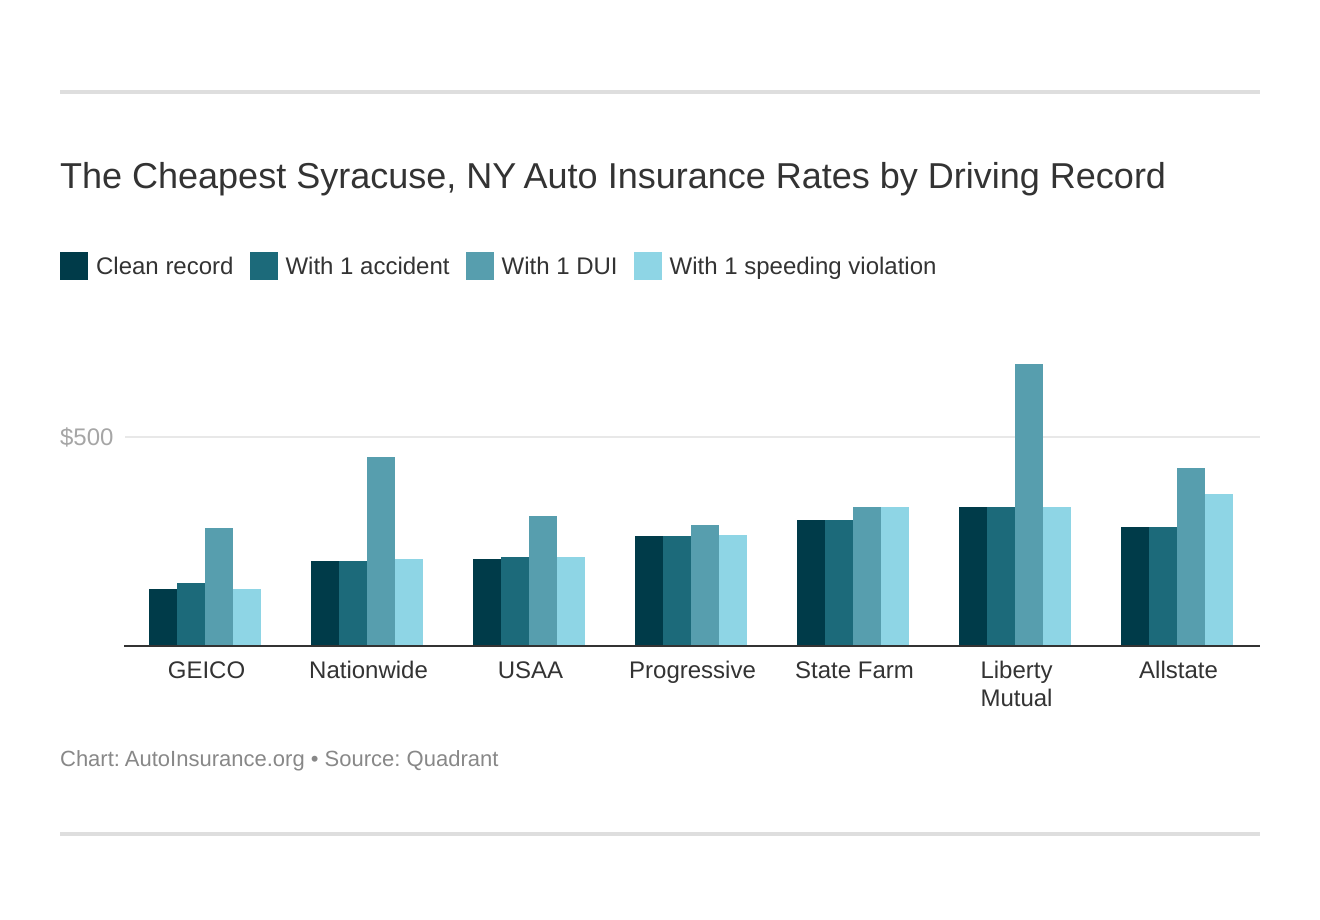 The Cheapest Syracuse, NY Auto Insurance Rates by Driving Record